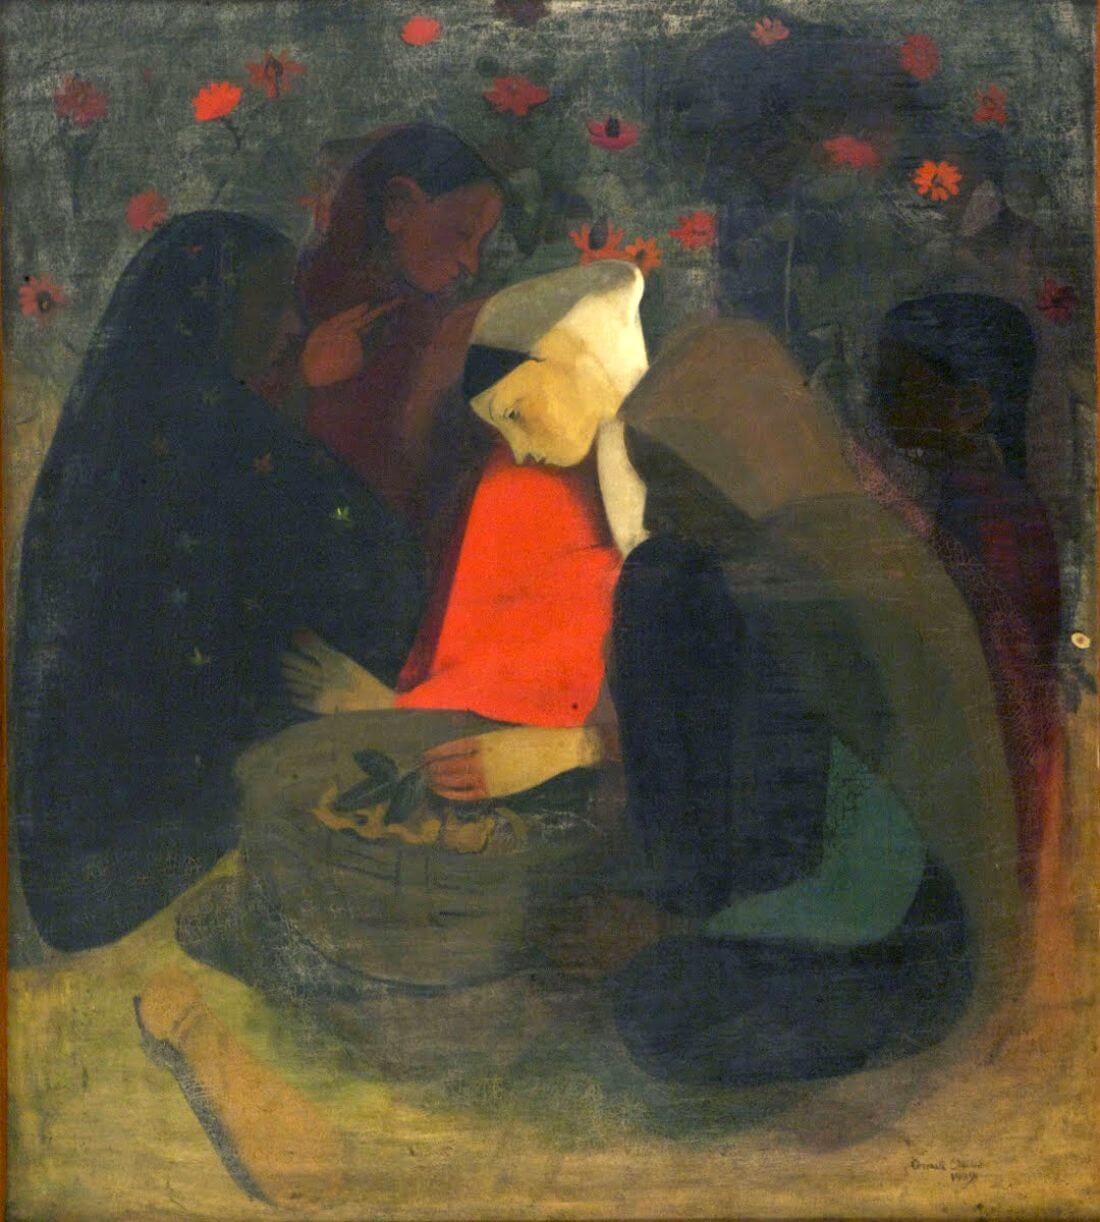 Resting Fruit Sellers - Amrita Sher-Gil - Indian Art Painting - Art Prints  by Amrita Sher-Gil | Buy Posters, Frames, Canvas &amp;amp; Digital Art Prints |  Small, Compact, Medium and Large Variants